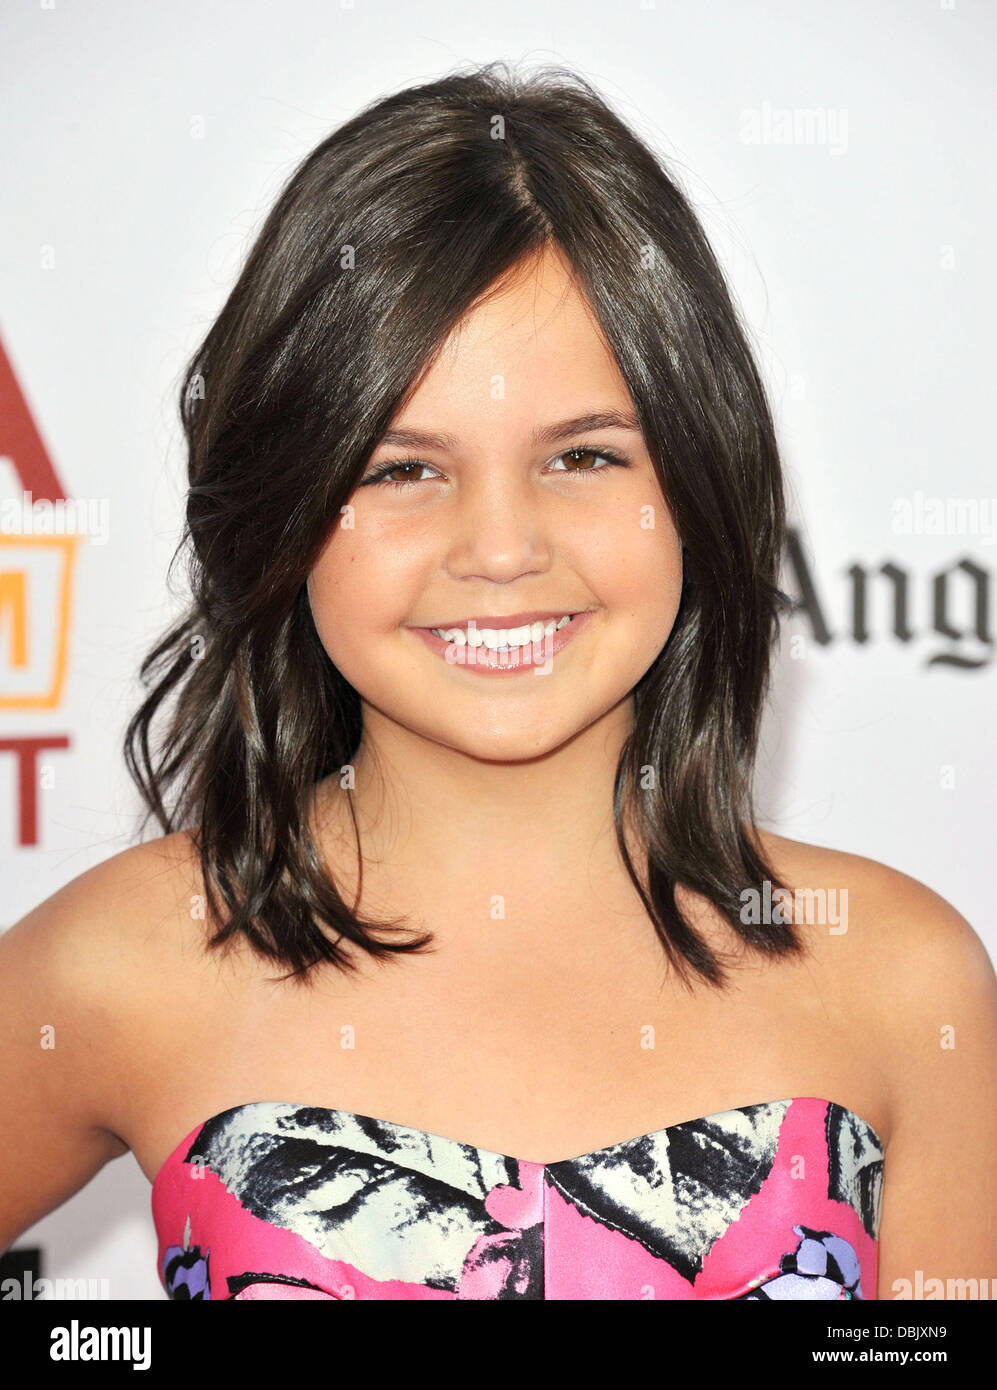 Bailee Madison 'Don't Be Afraid of the Dark' Premiere at 2011 LAFF at Regal Cinemas L.A. Live - Arrivals Los Angeles, California - 26.06.11 Stock Photo